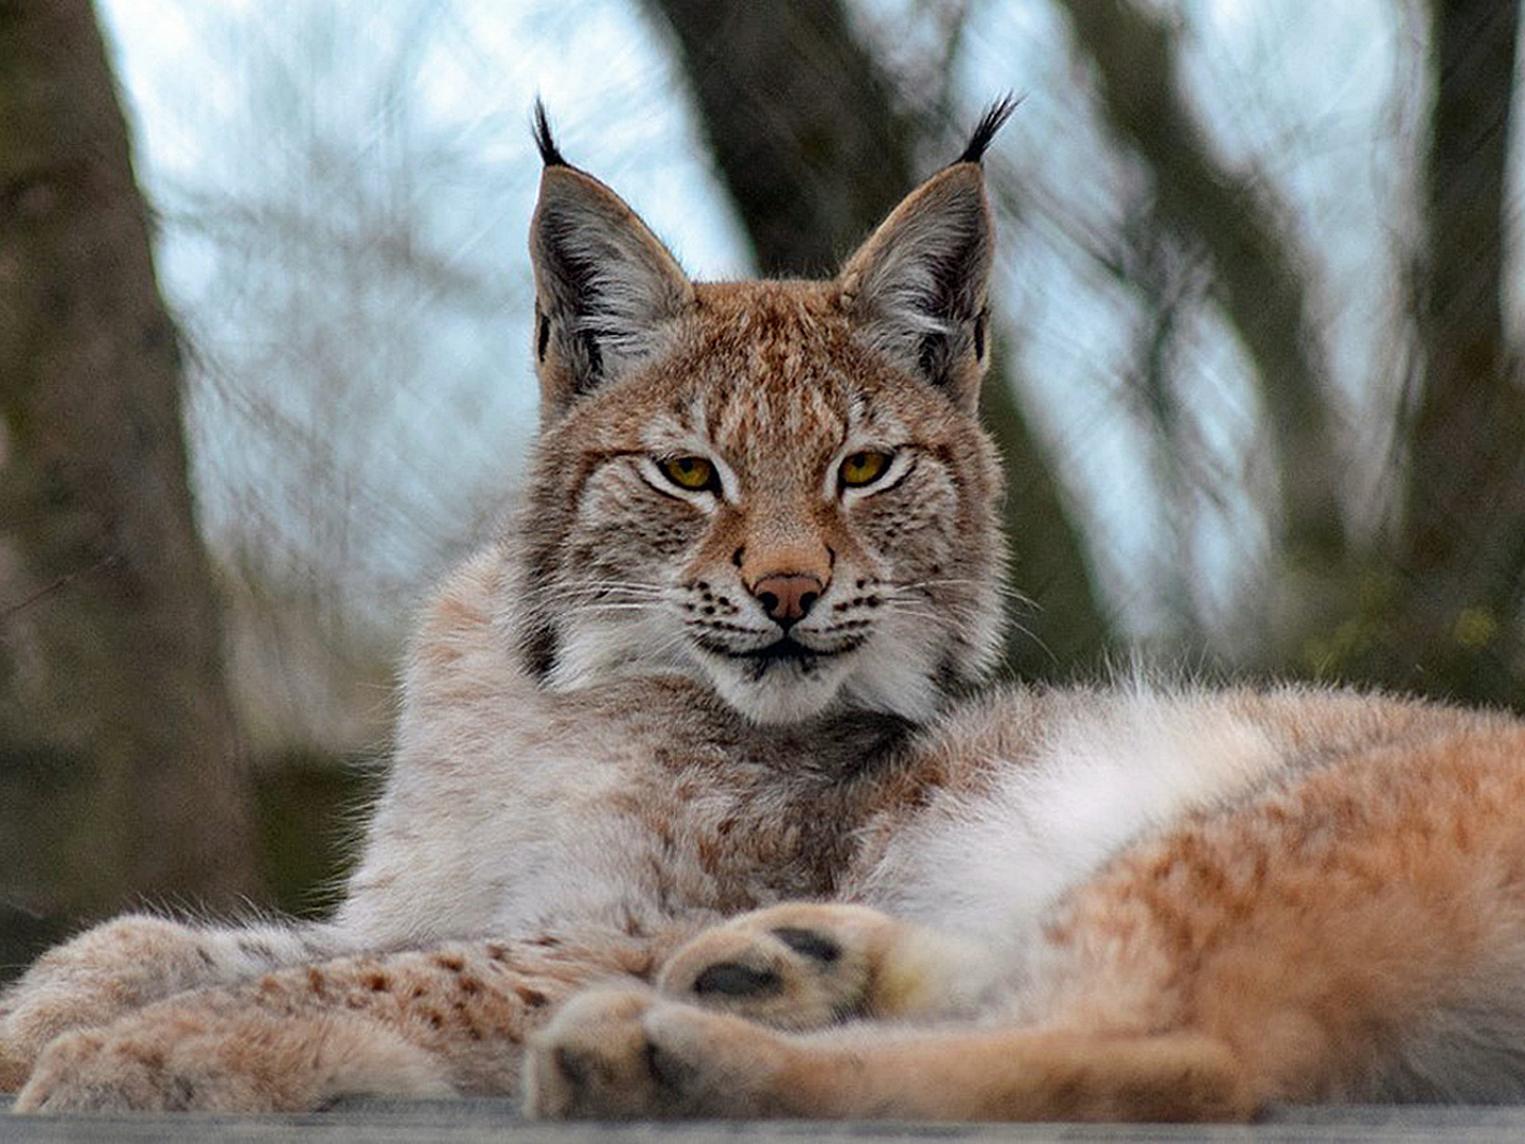 Wild Lynx on the loose in Wales after escaping from zoo | The Independent